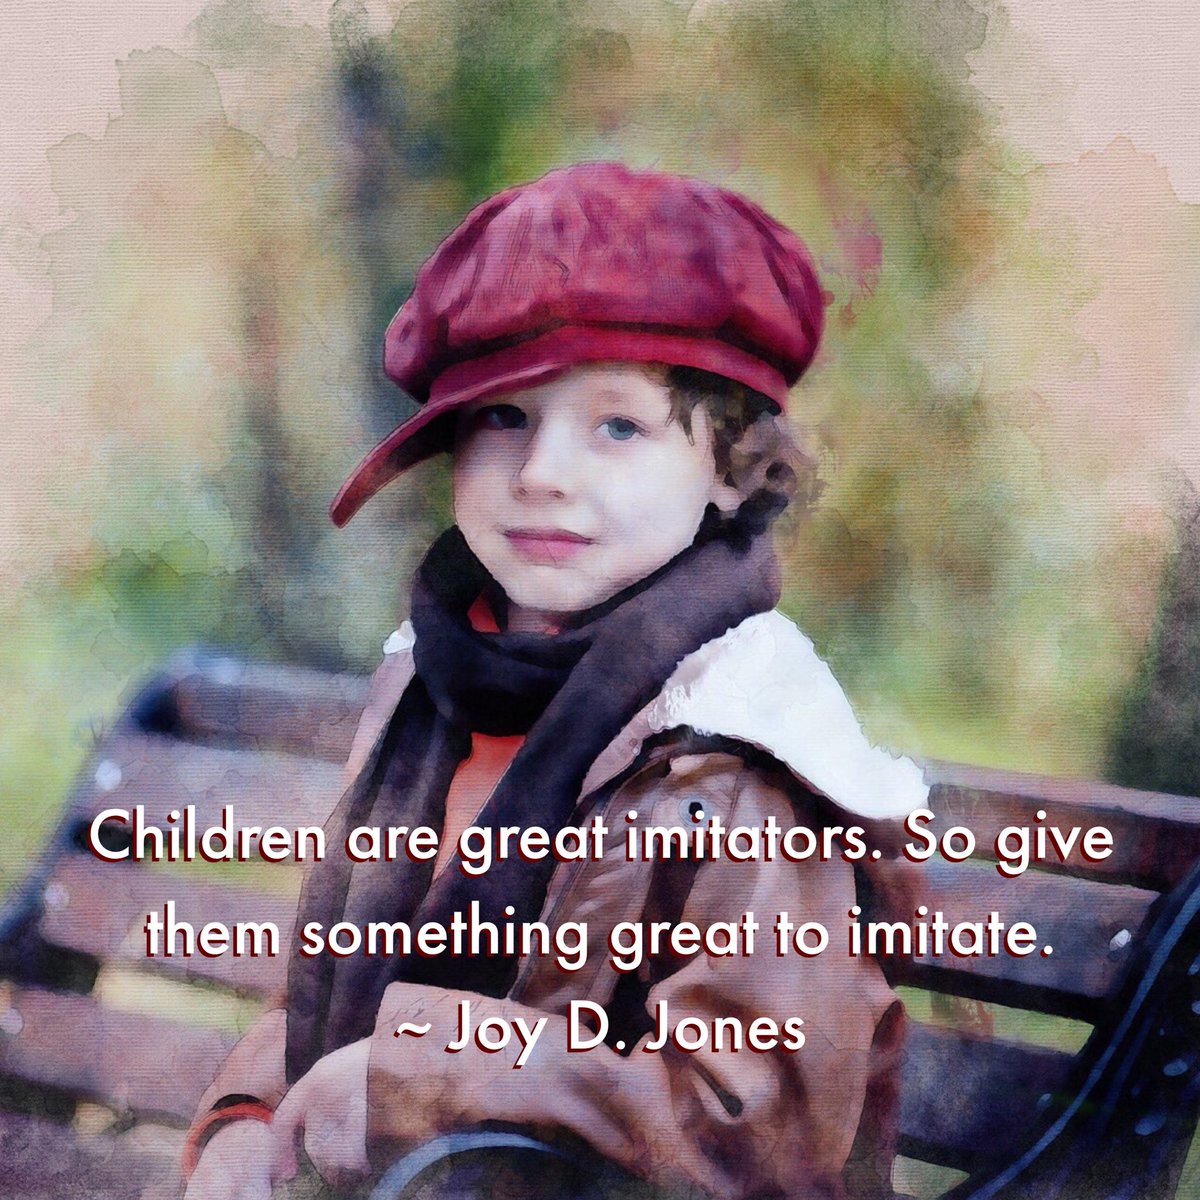 #Children are great imitators. So give them something great to imitate.
~ Joy D. Jones
#ChildrensMarch